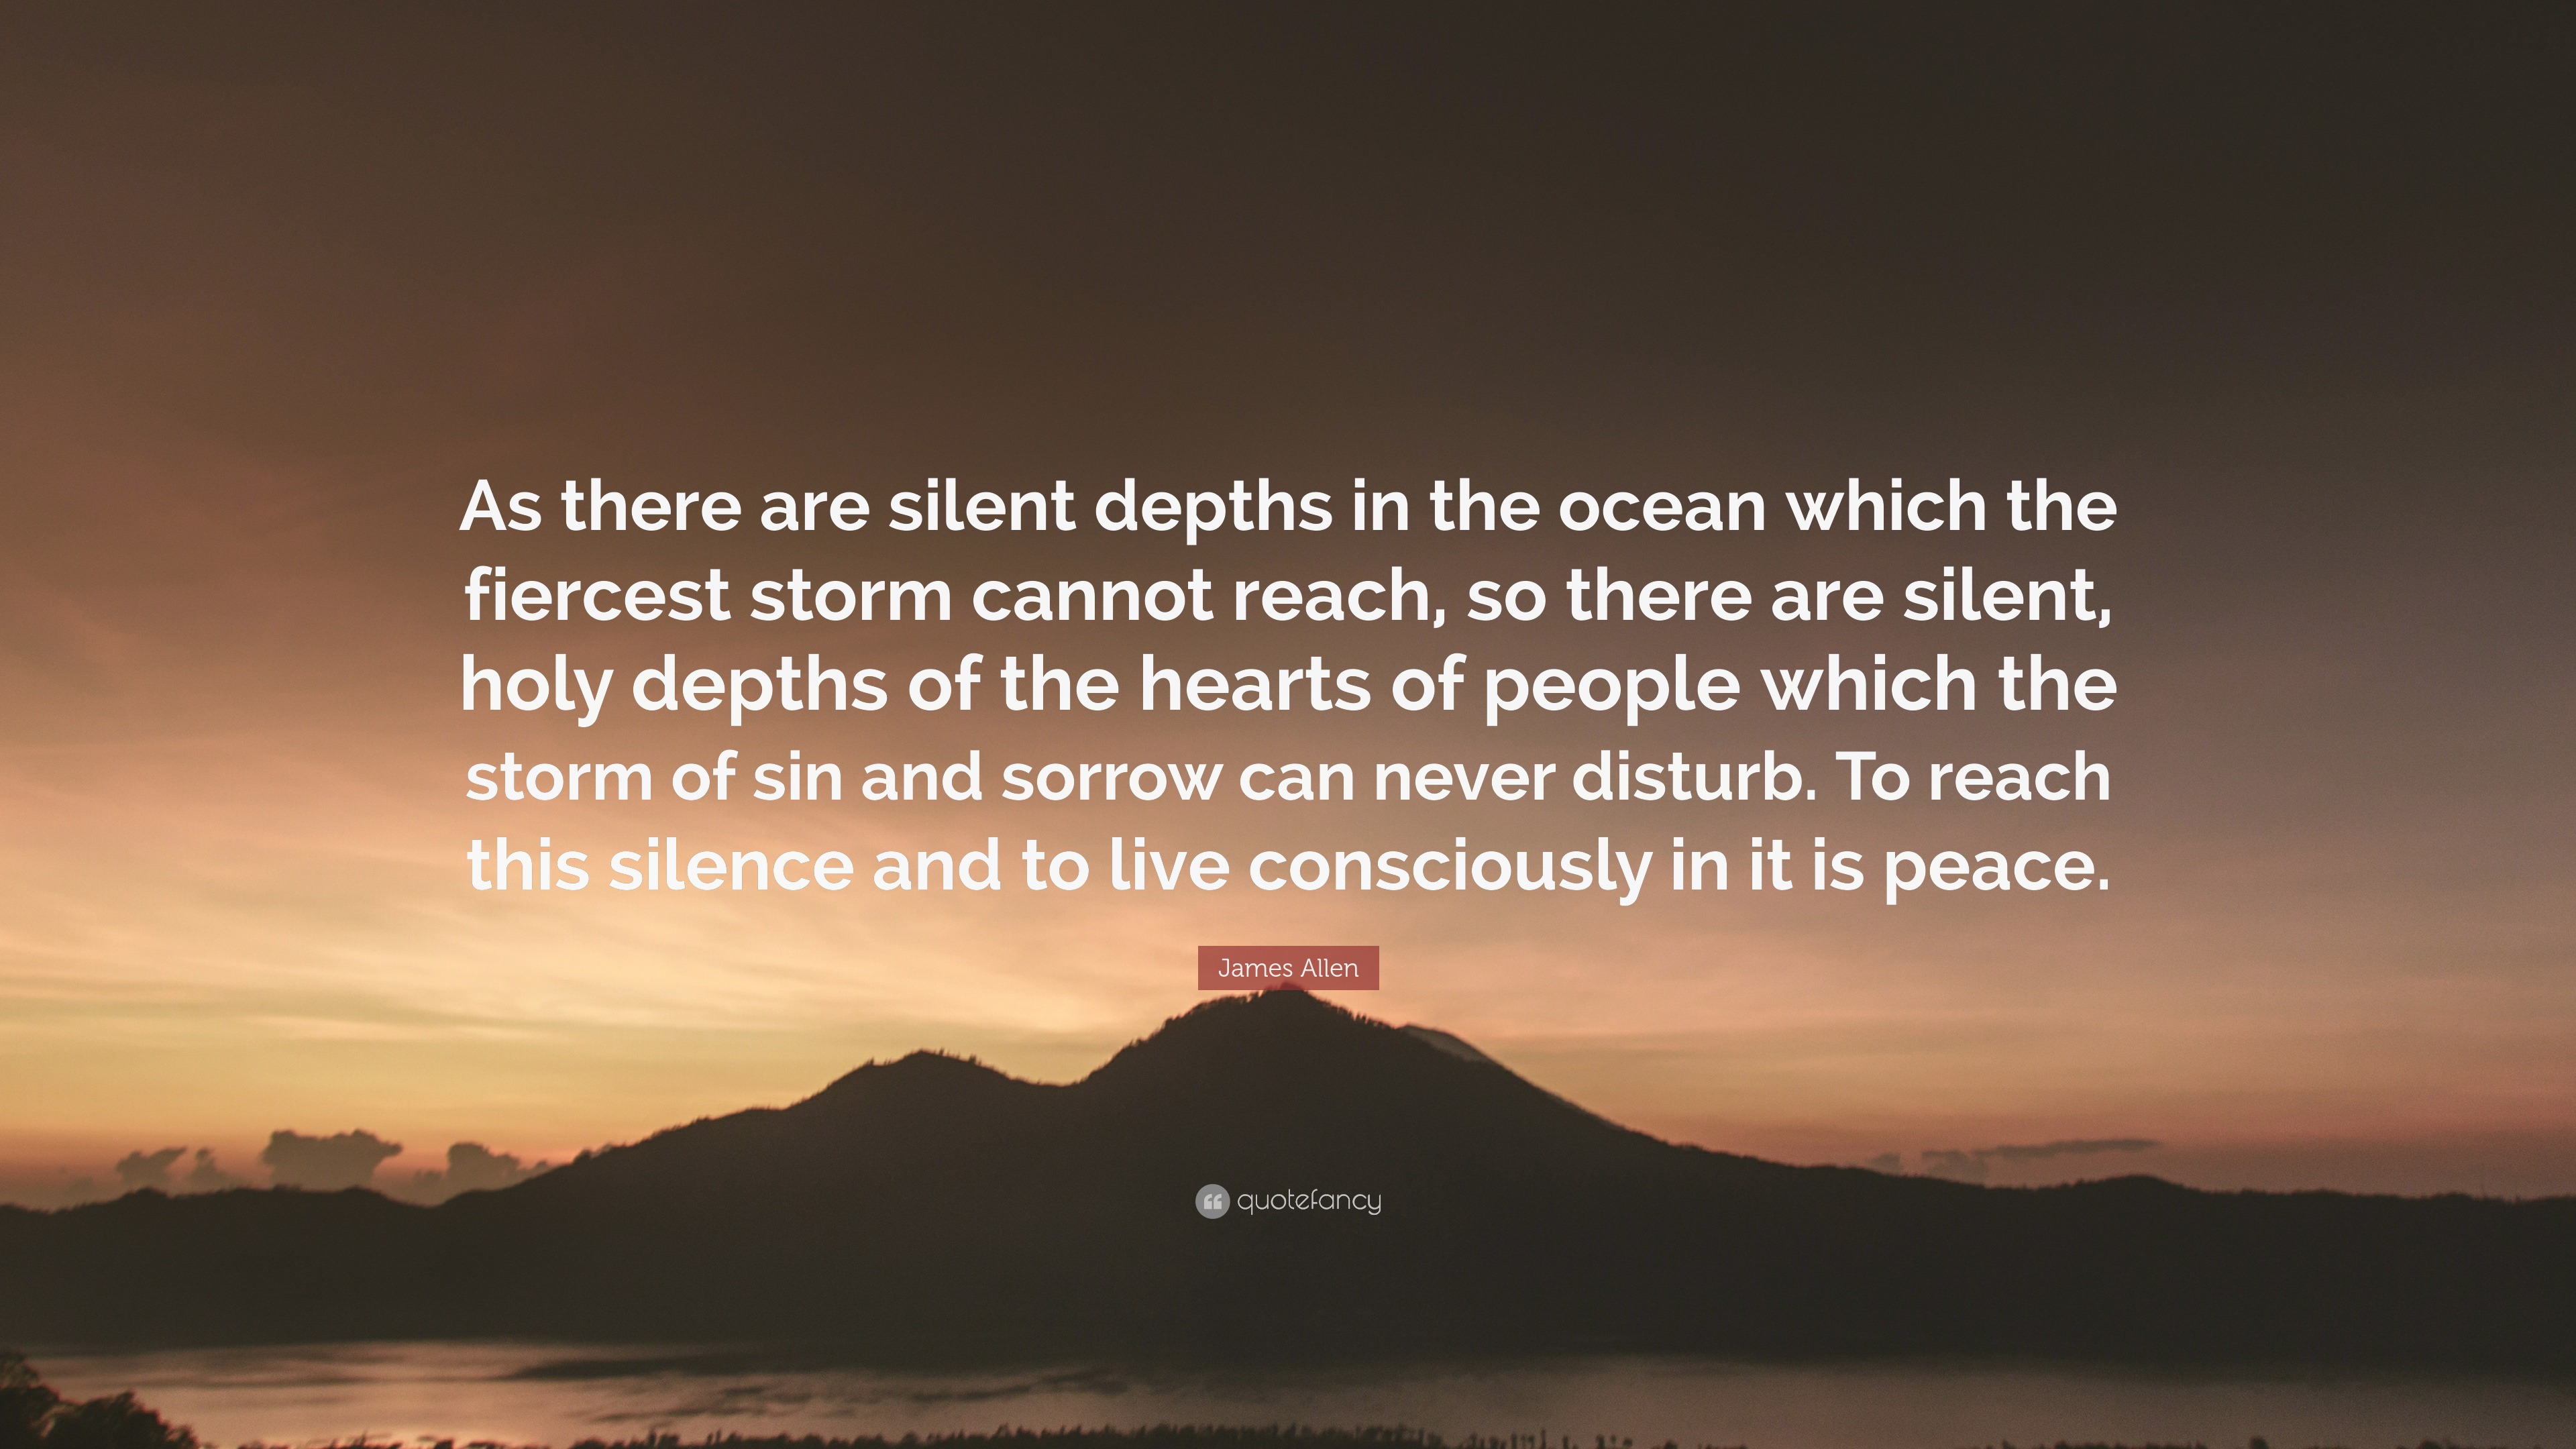 James Allen Quote As There Are Silent Depths In The Ocean Which The Fiercest Storm Cannot Reach So There Are Silent Holy Depths Of The H